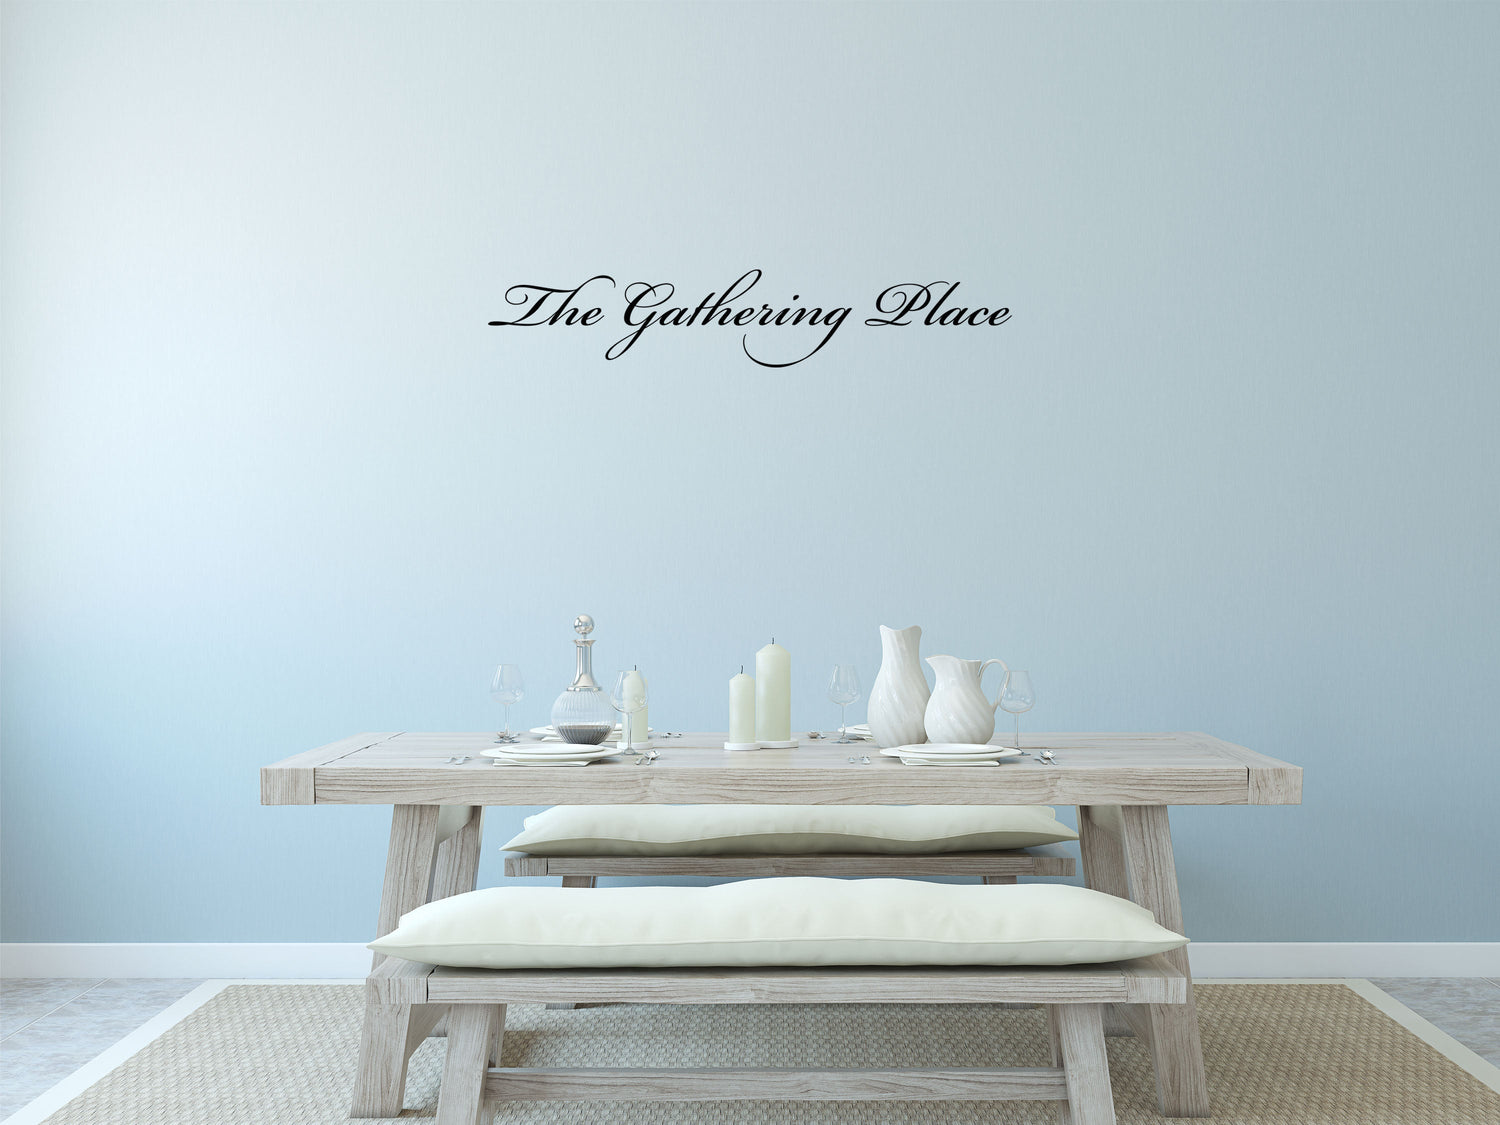 The Gathering Place - Inspirational Wall Signs Vinyl Wall Decal Inspirational Wall Signs 